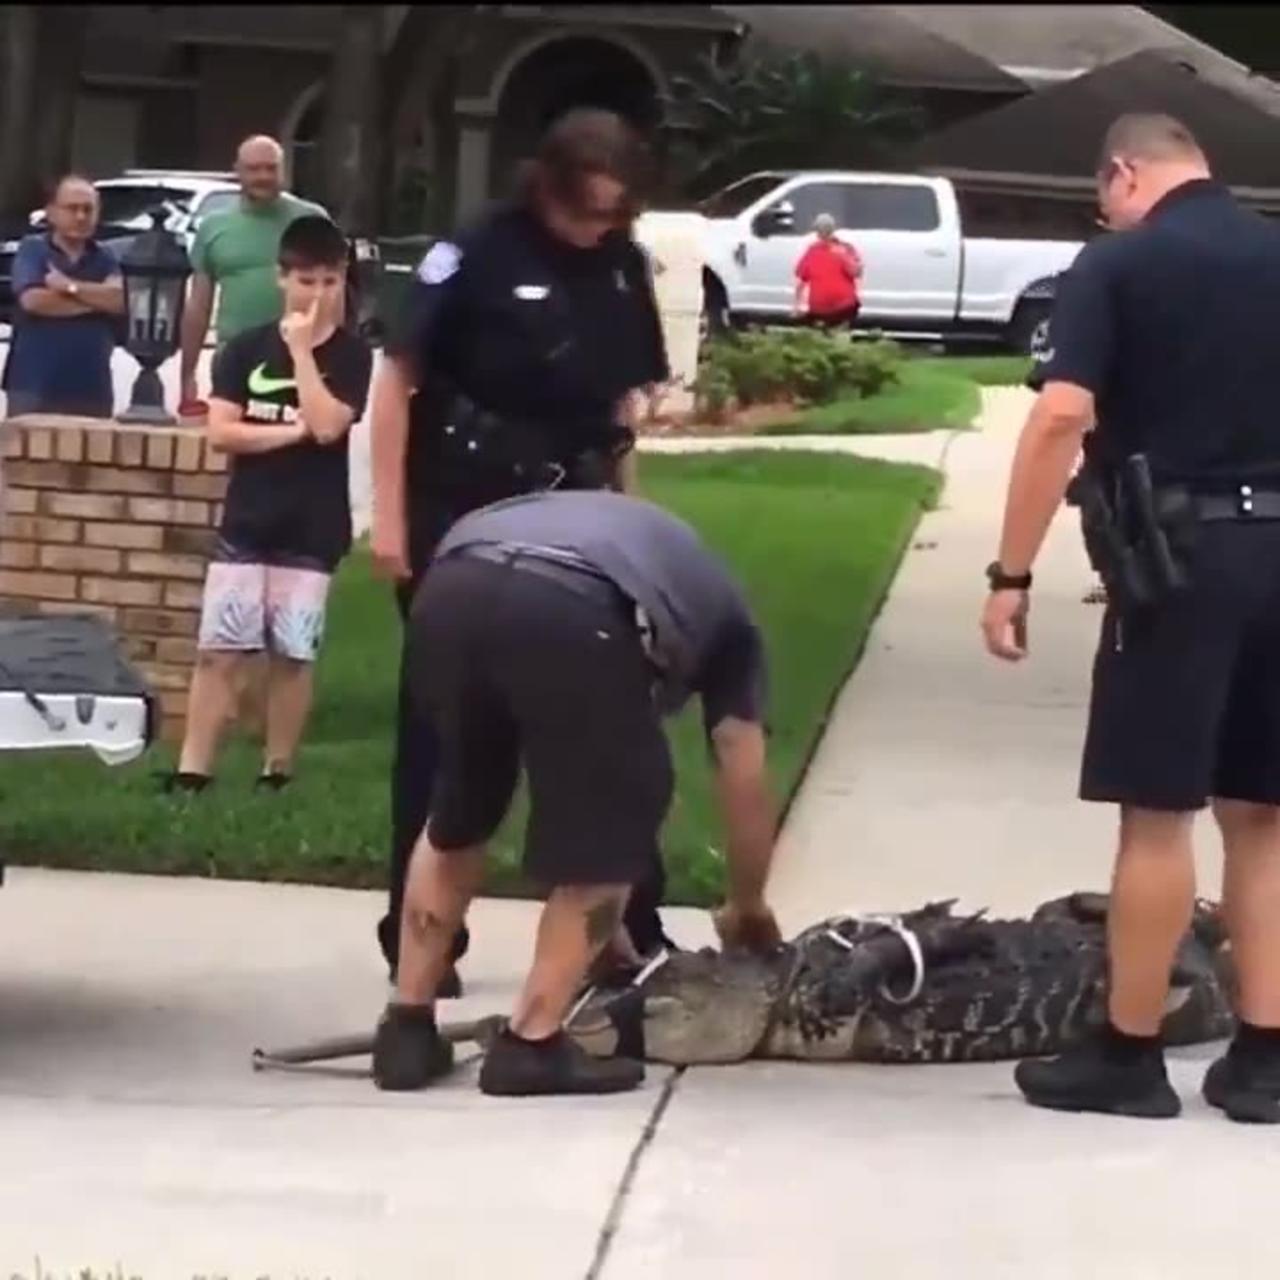 Restrained alligator knocks out man after being taunted